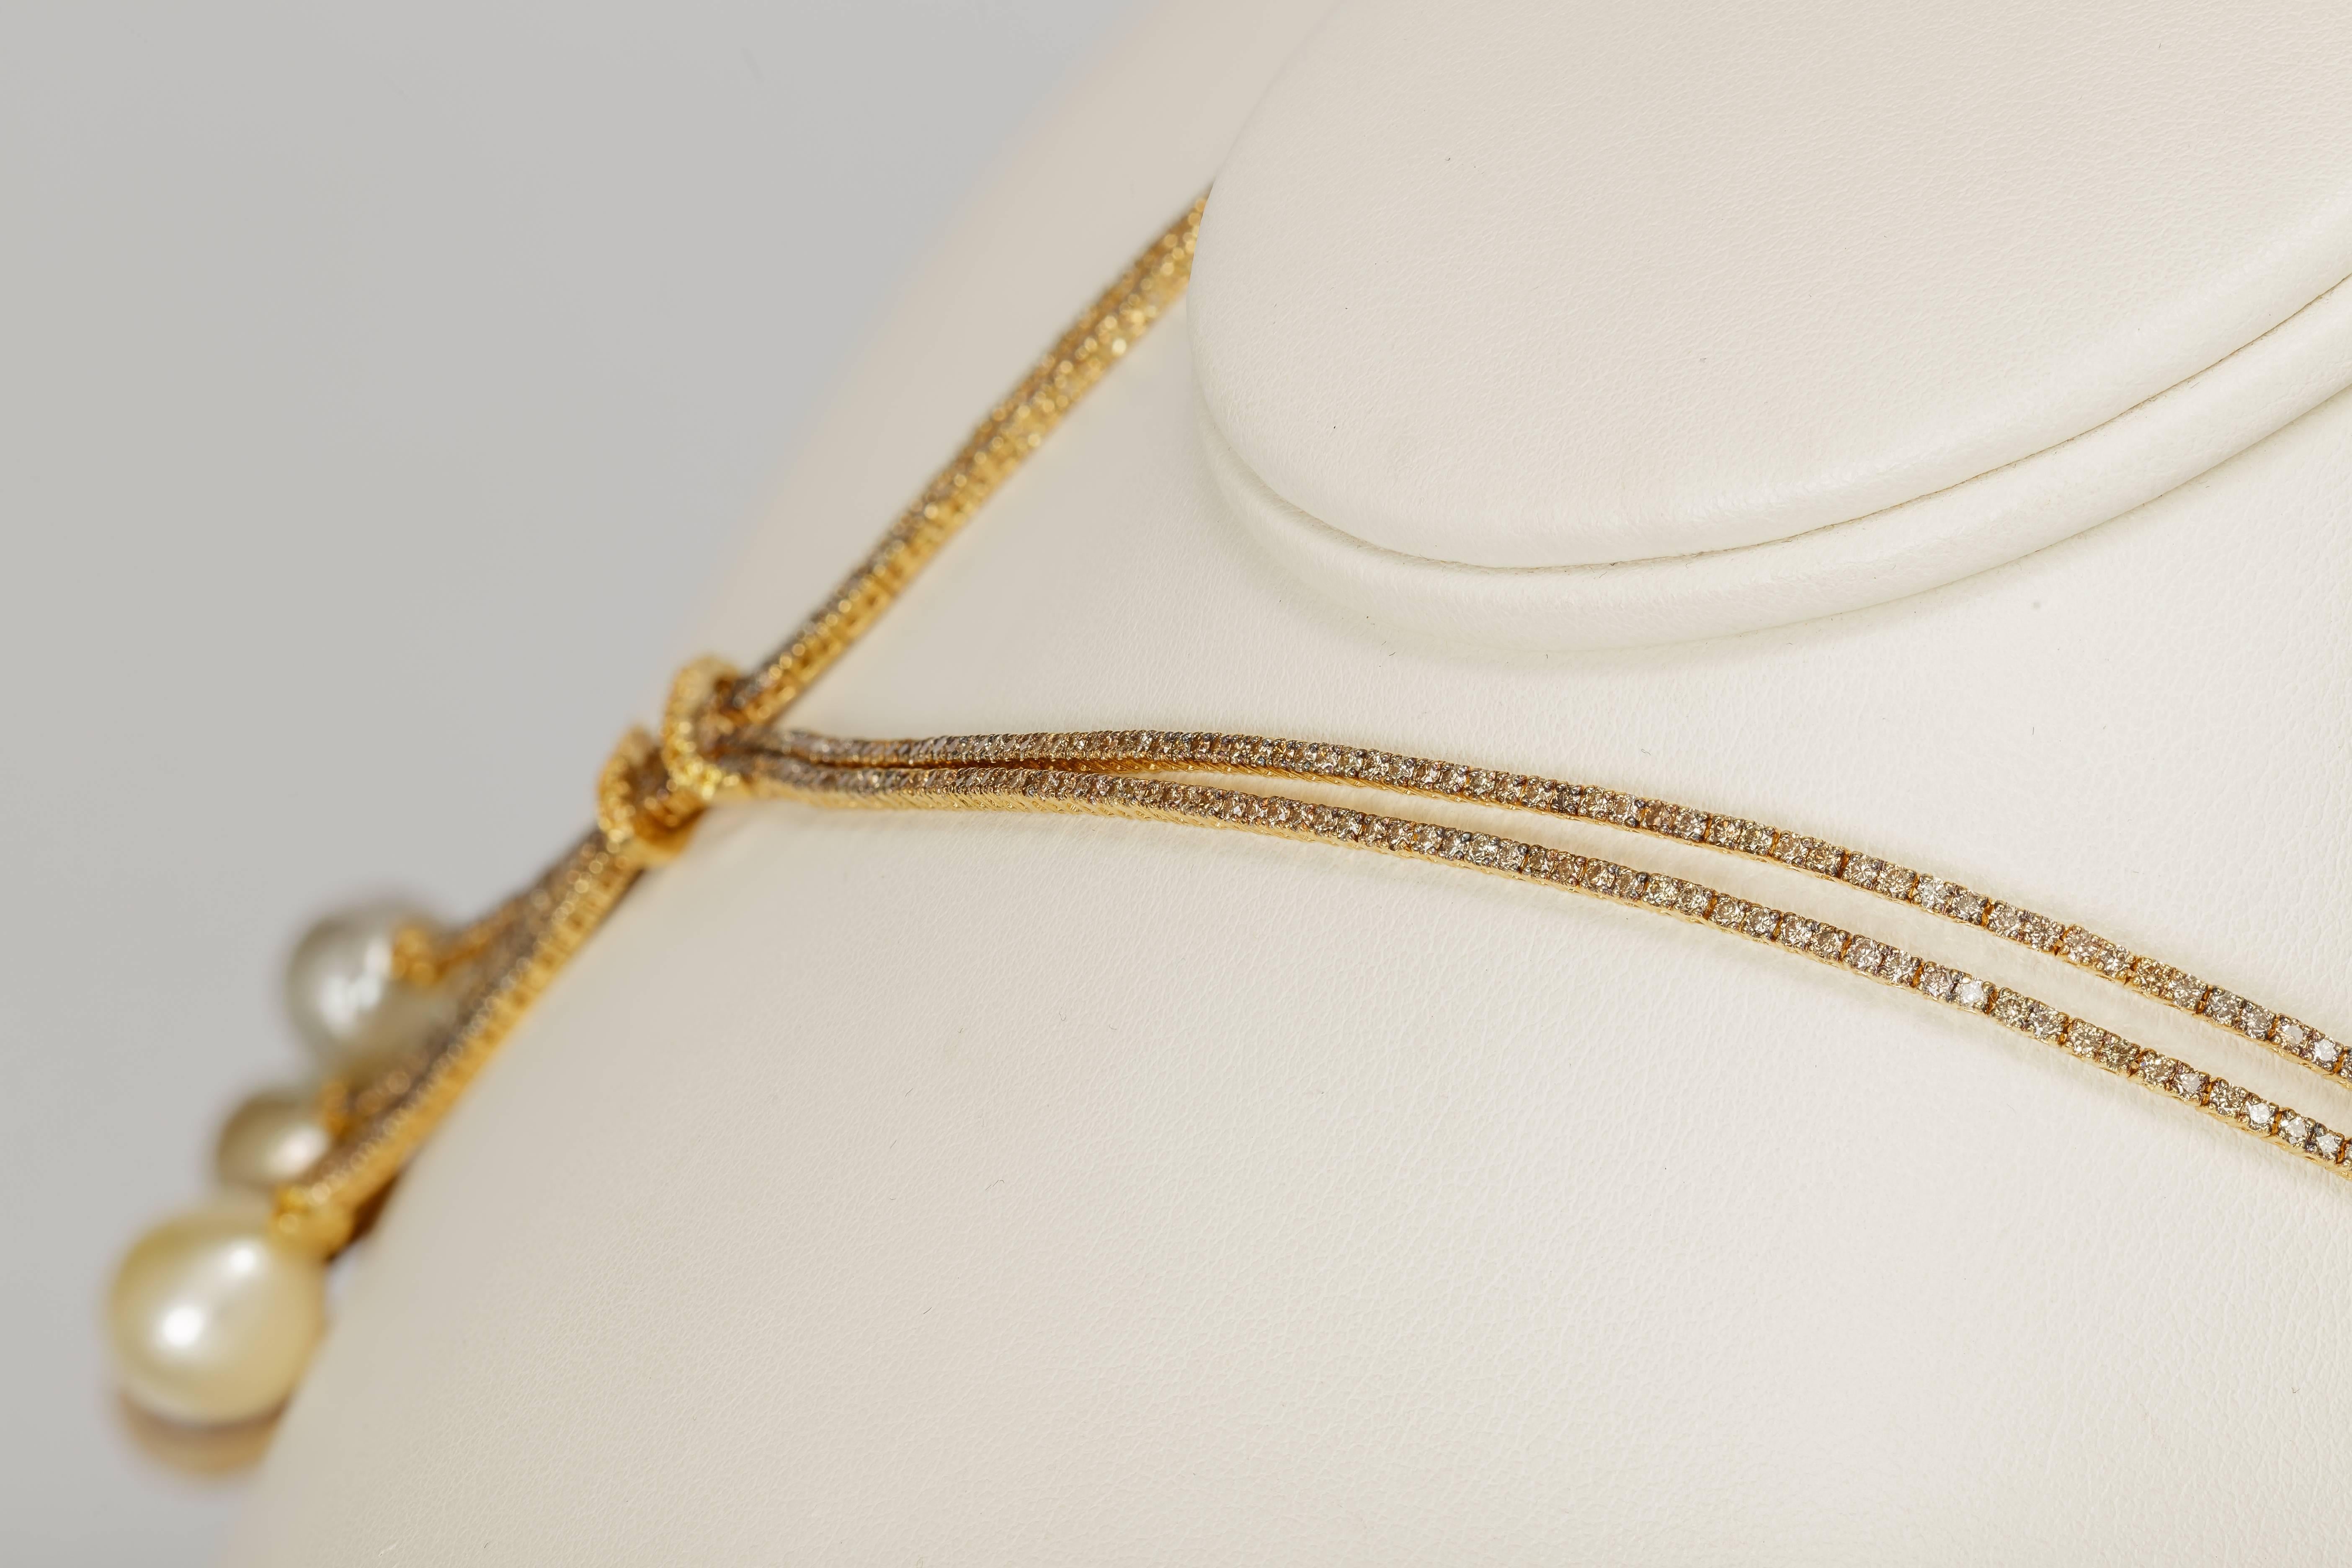 Yvel Pearl Cognac Diamond Yellow Sapphire Necklace 18k Yellow Gold 10.83 Carat In New Condition For Sale In Houston, TX